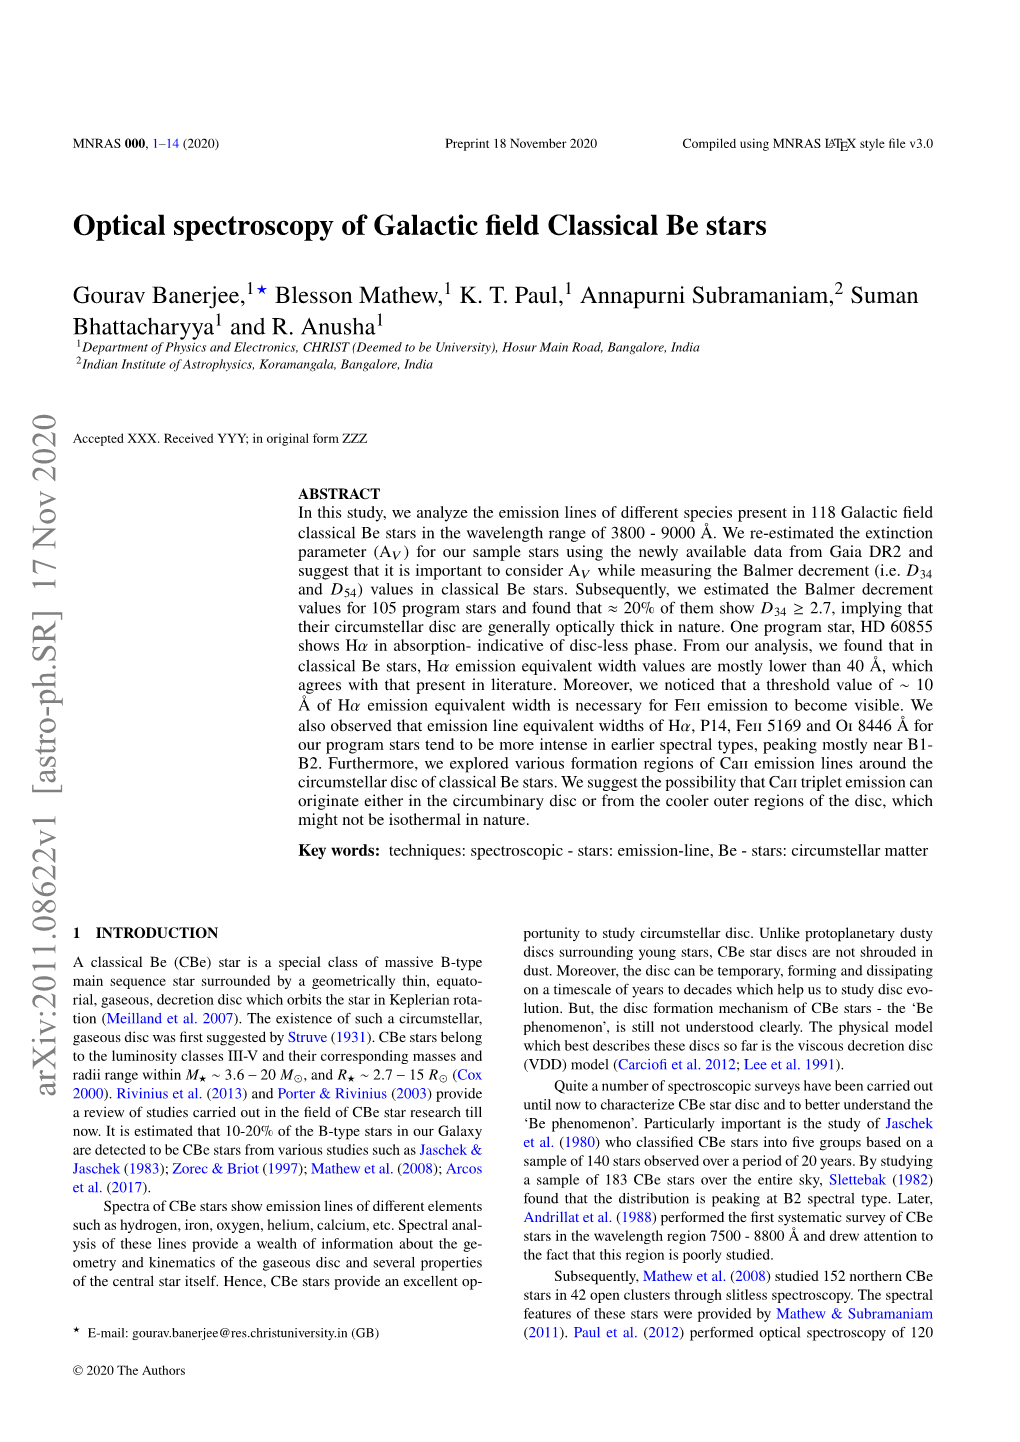 Optical Spectroscopy of Galactic Field Classical Be Stars